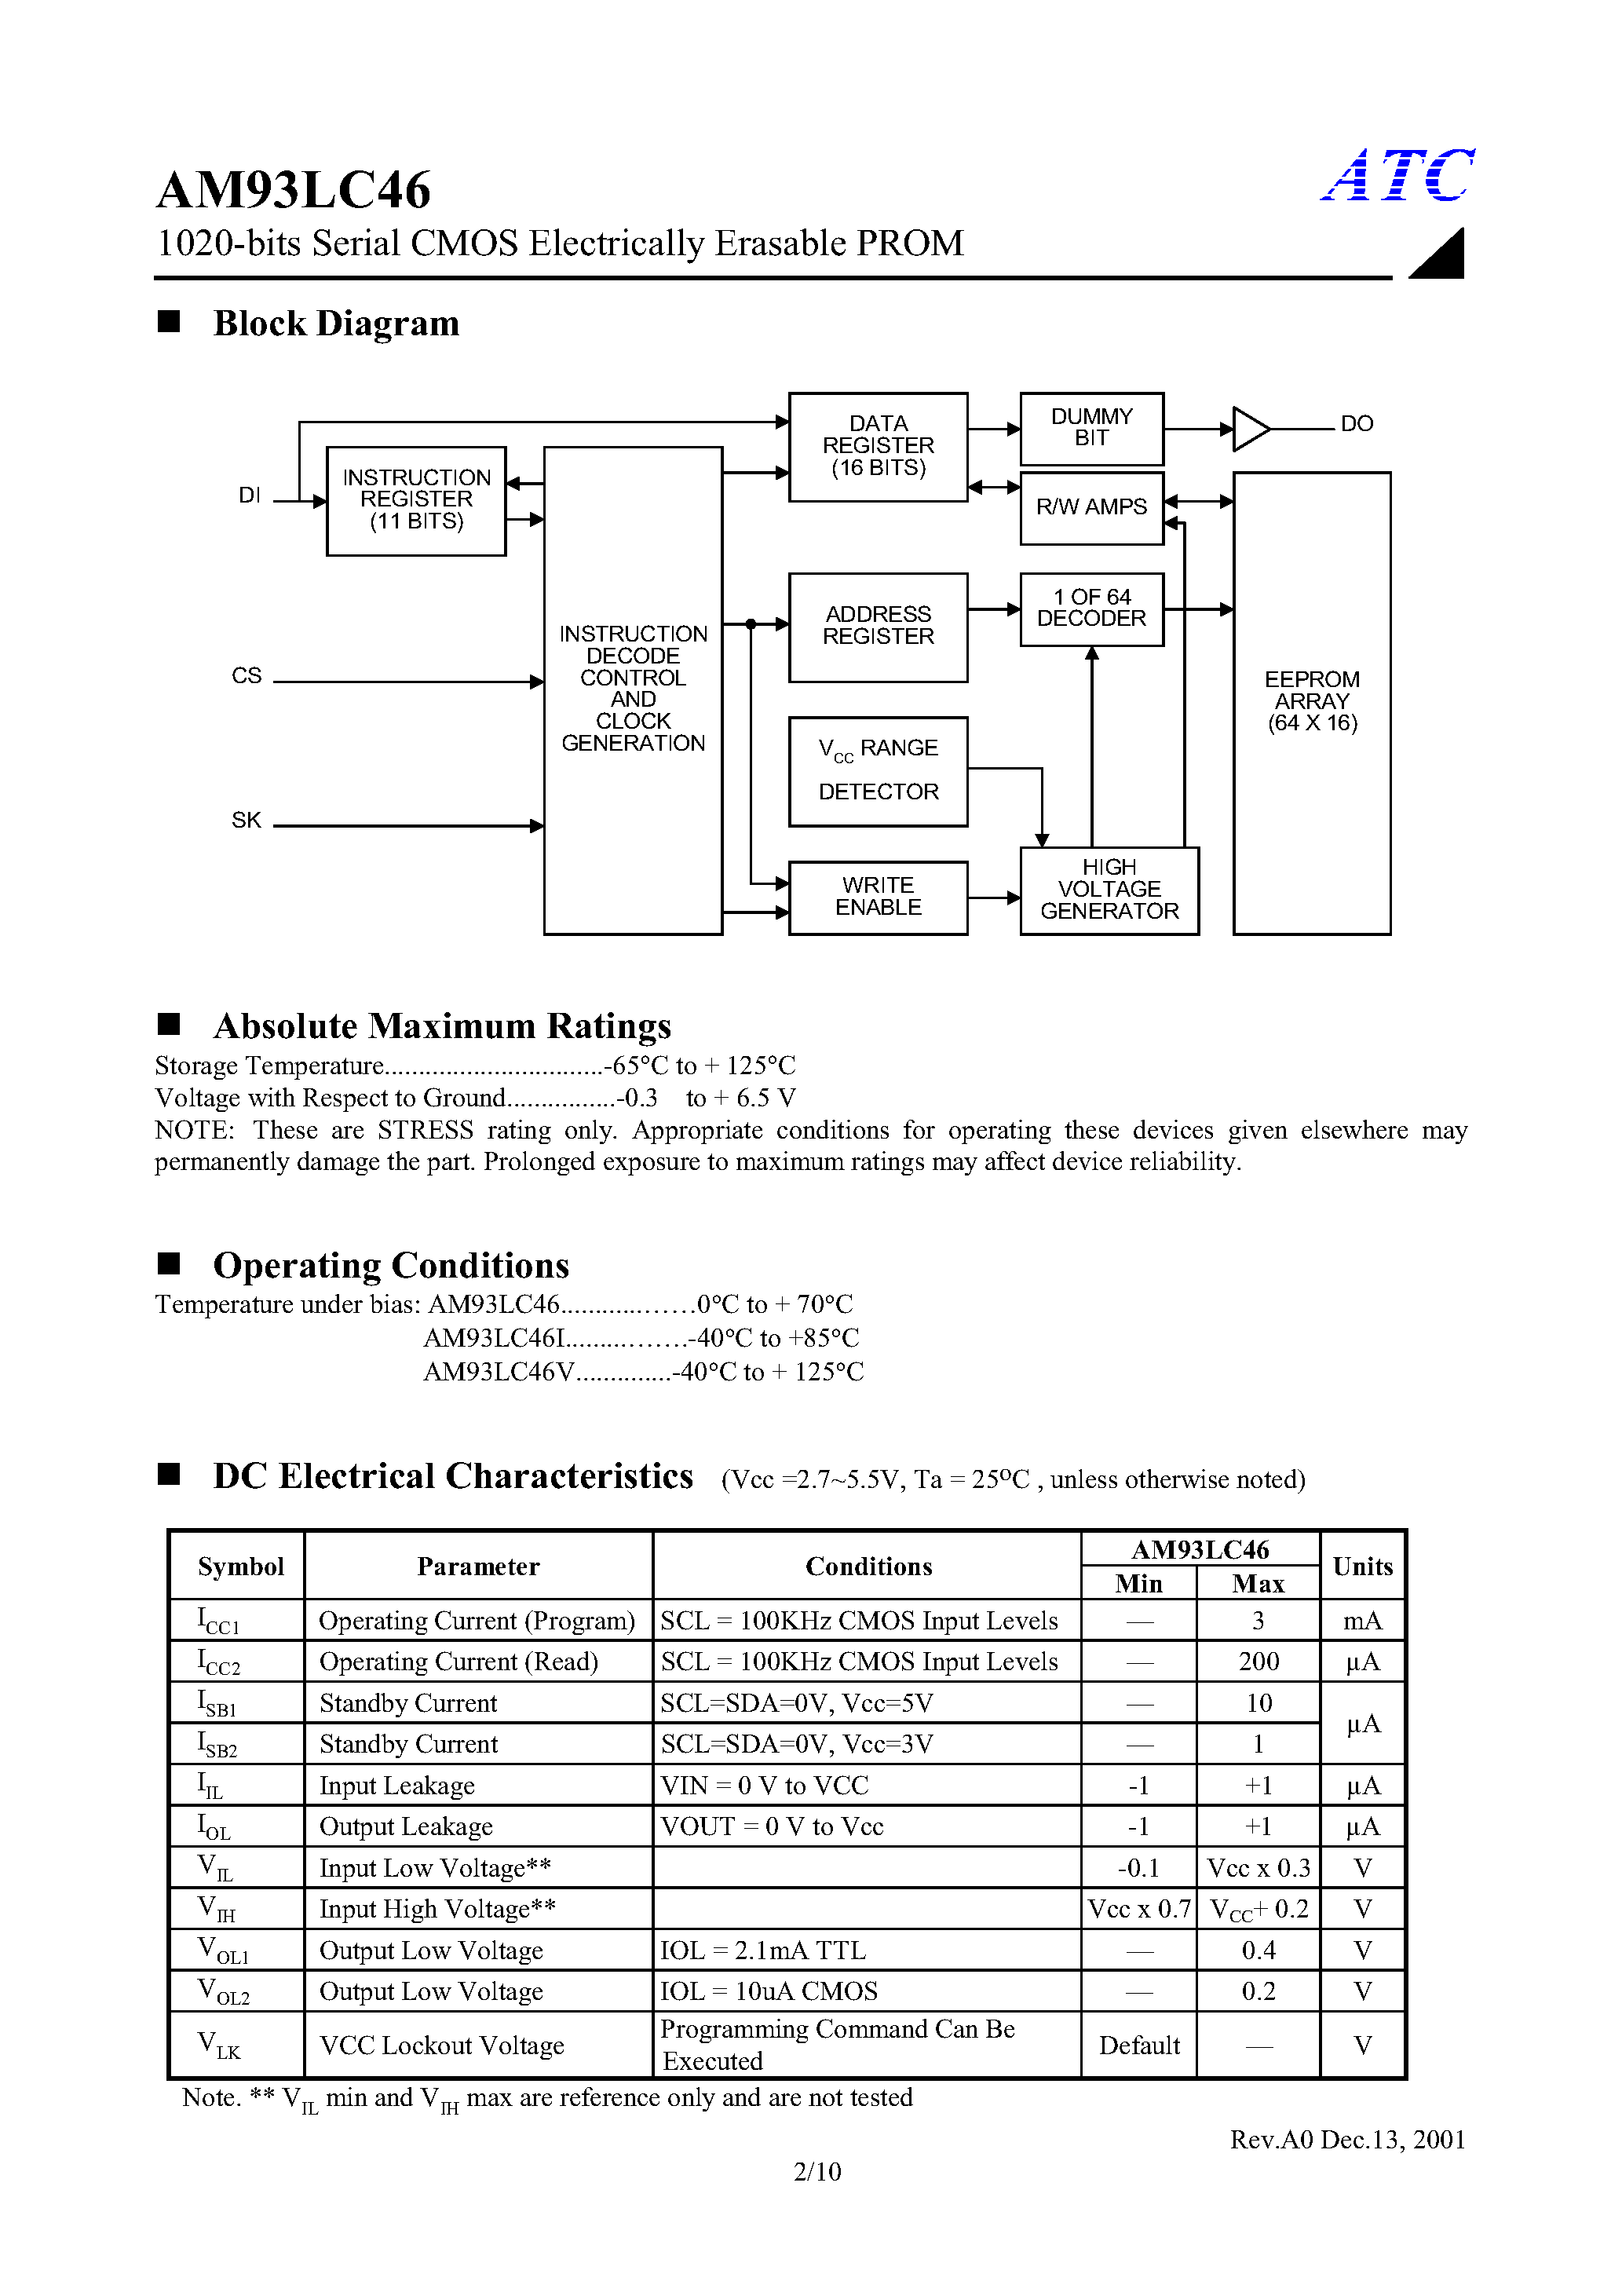 Datasheet AM93LC46IS8 - 1024-bits Serial Electrically Erasable PROM page 2